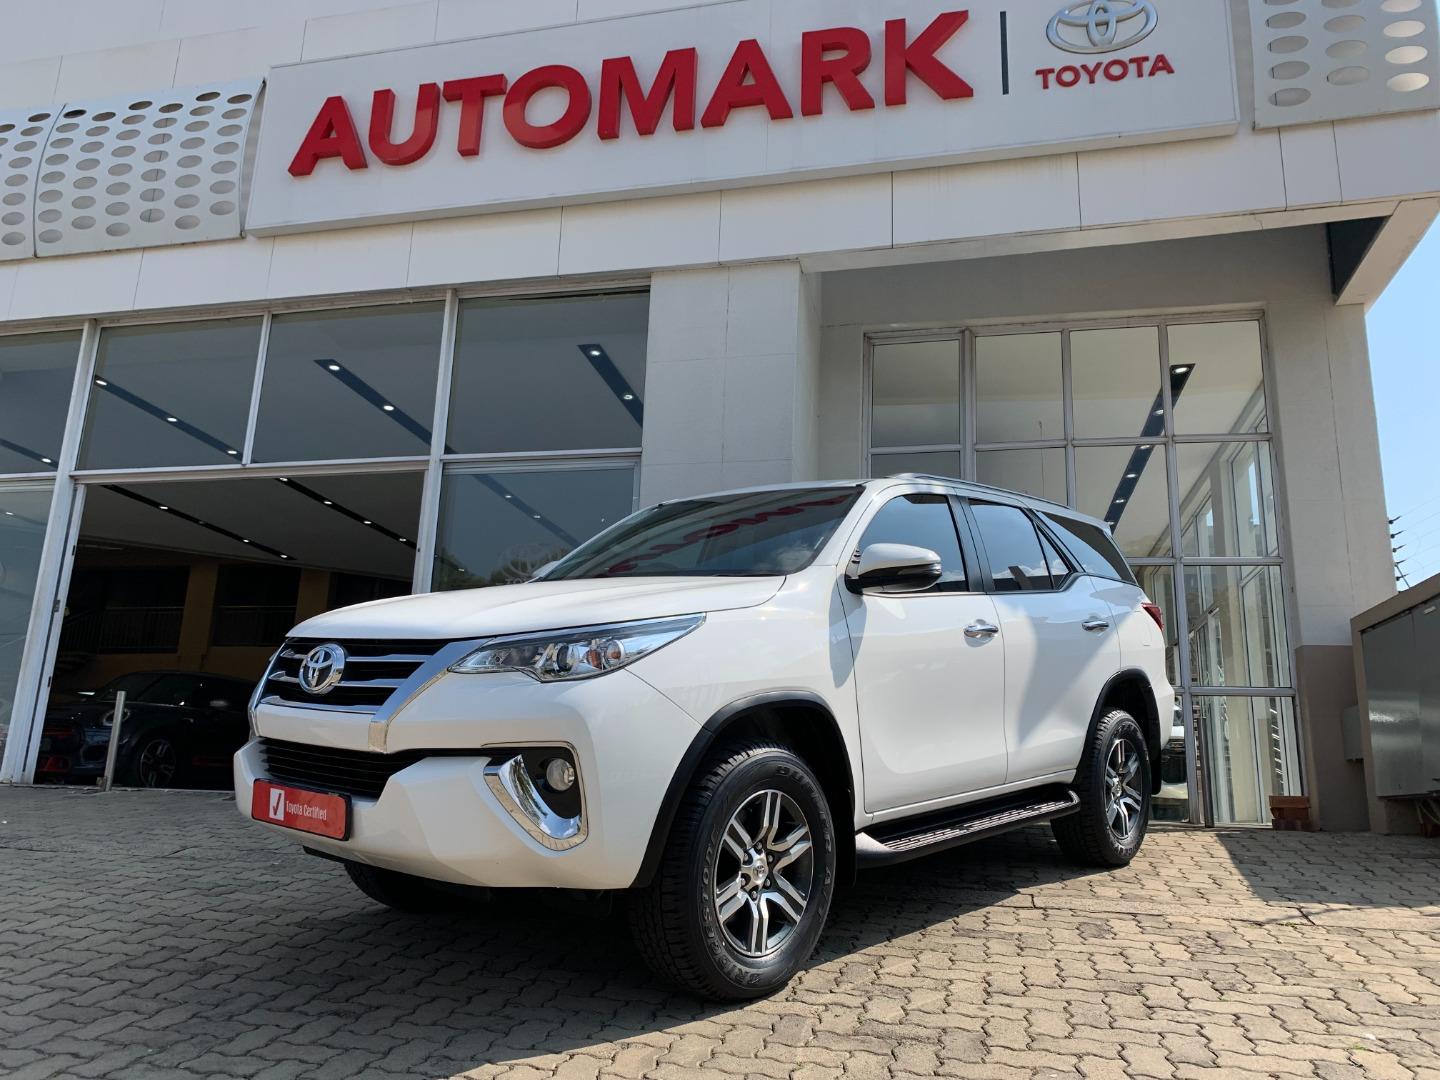 2019 Toyota Fortuner MY19.6 2.4 Gd-6 Raised bodytype At for sale - 343229